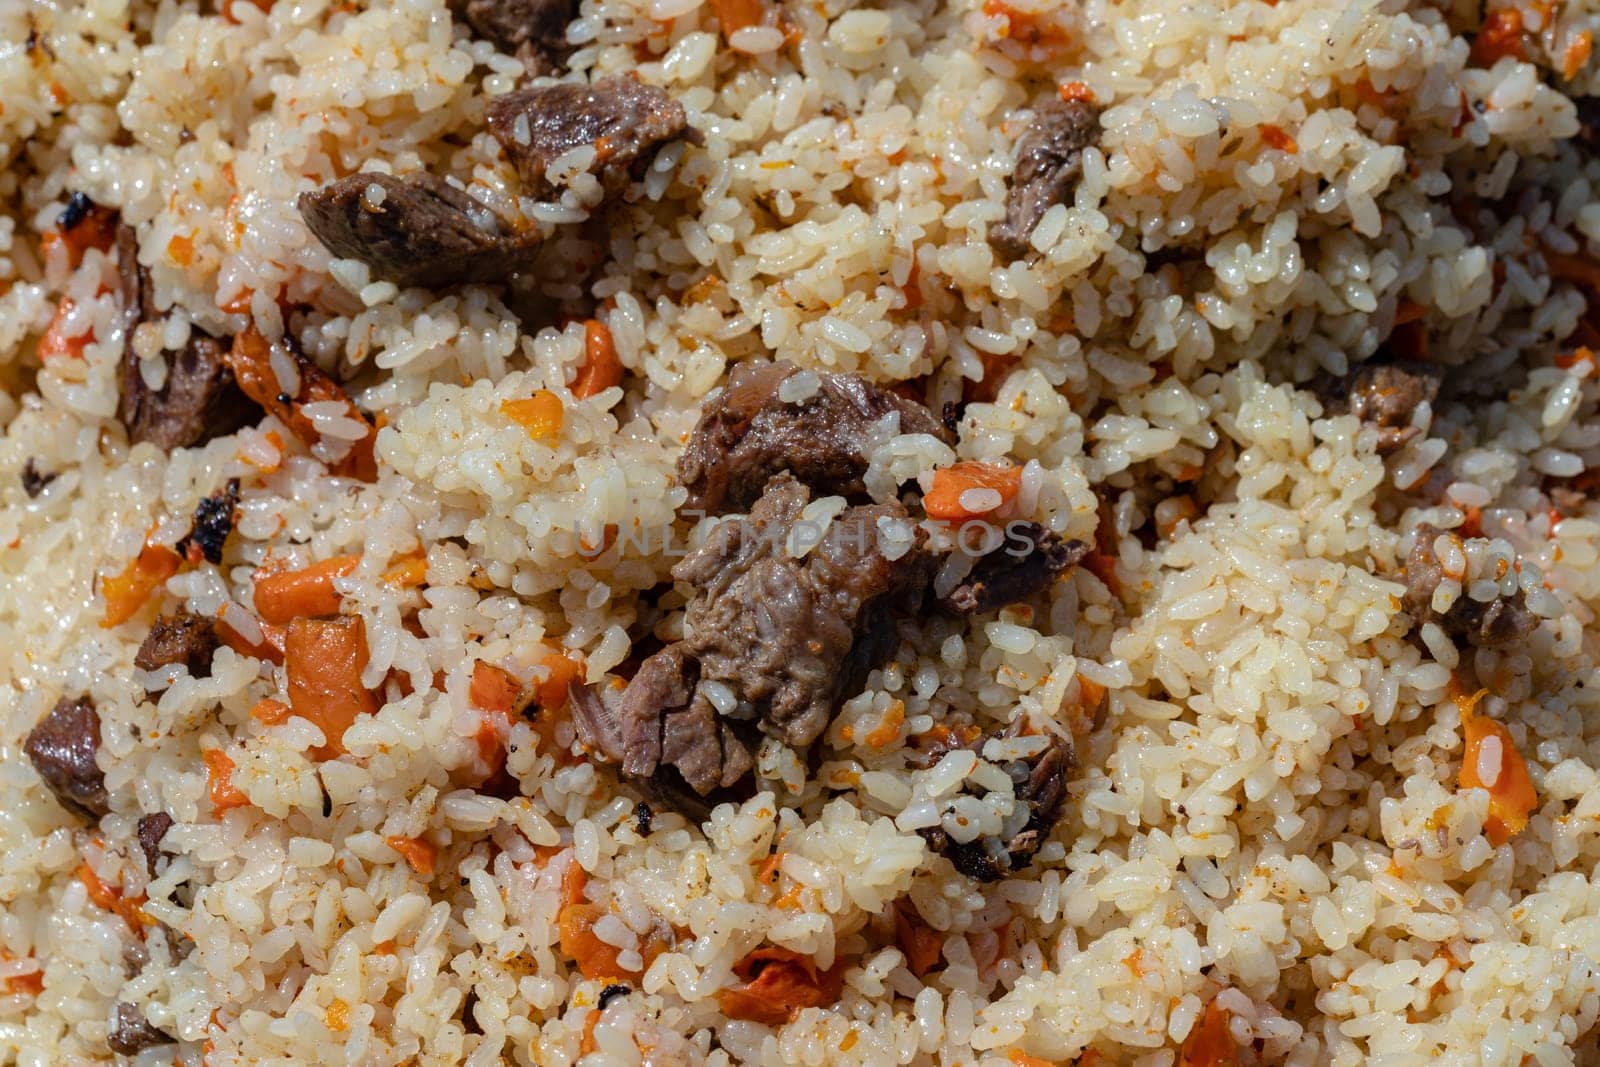 Traditional Eastern culinary dish - pilaf. Ingredients: rice with slices of meat, fat and vegetables (carrot, garlic), spices - popular recipe. Close-up view of Asian tasty food background.